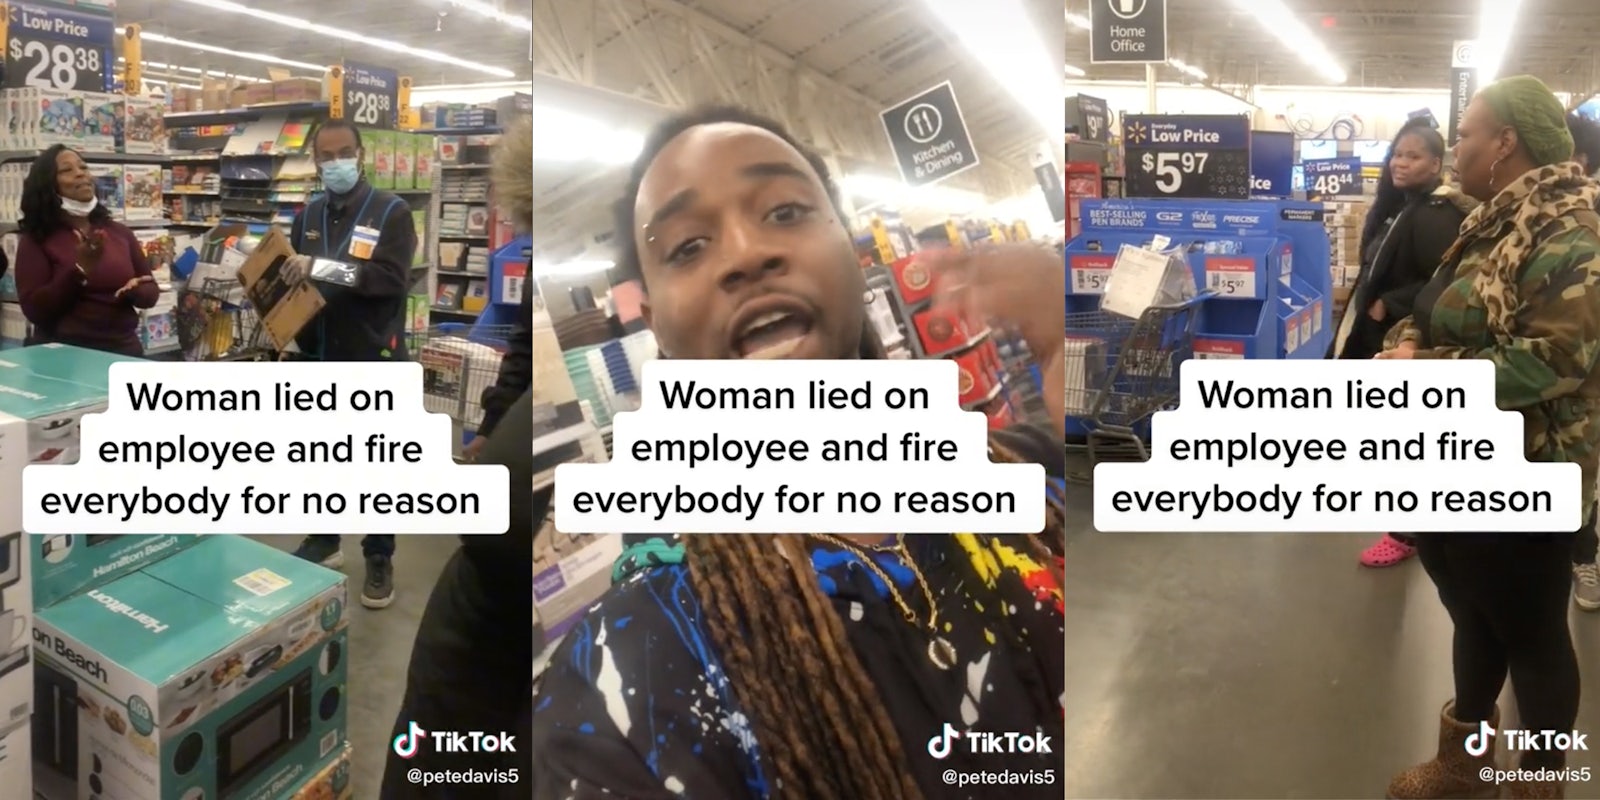 Walmart manager appears to fire employees on sales floor